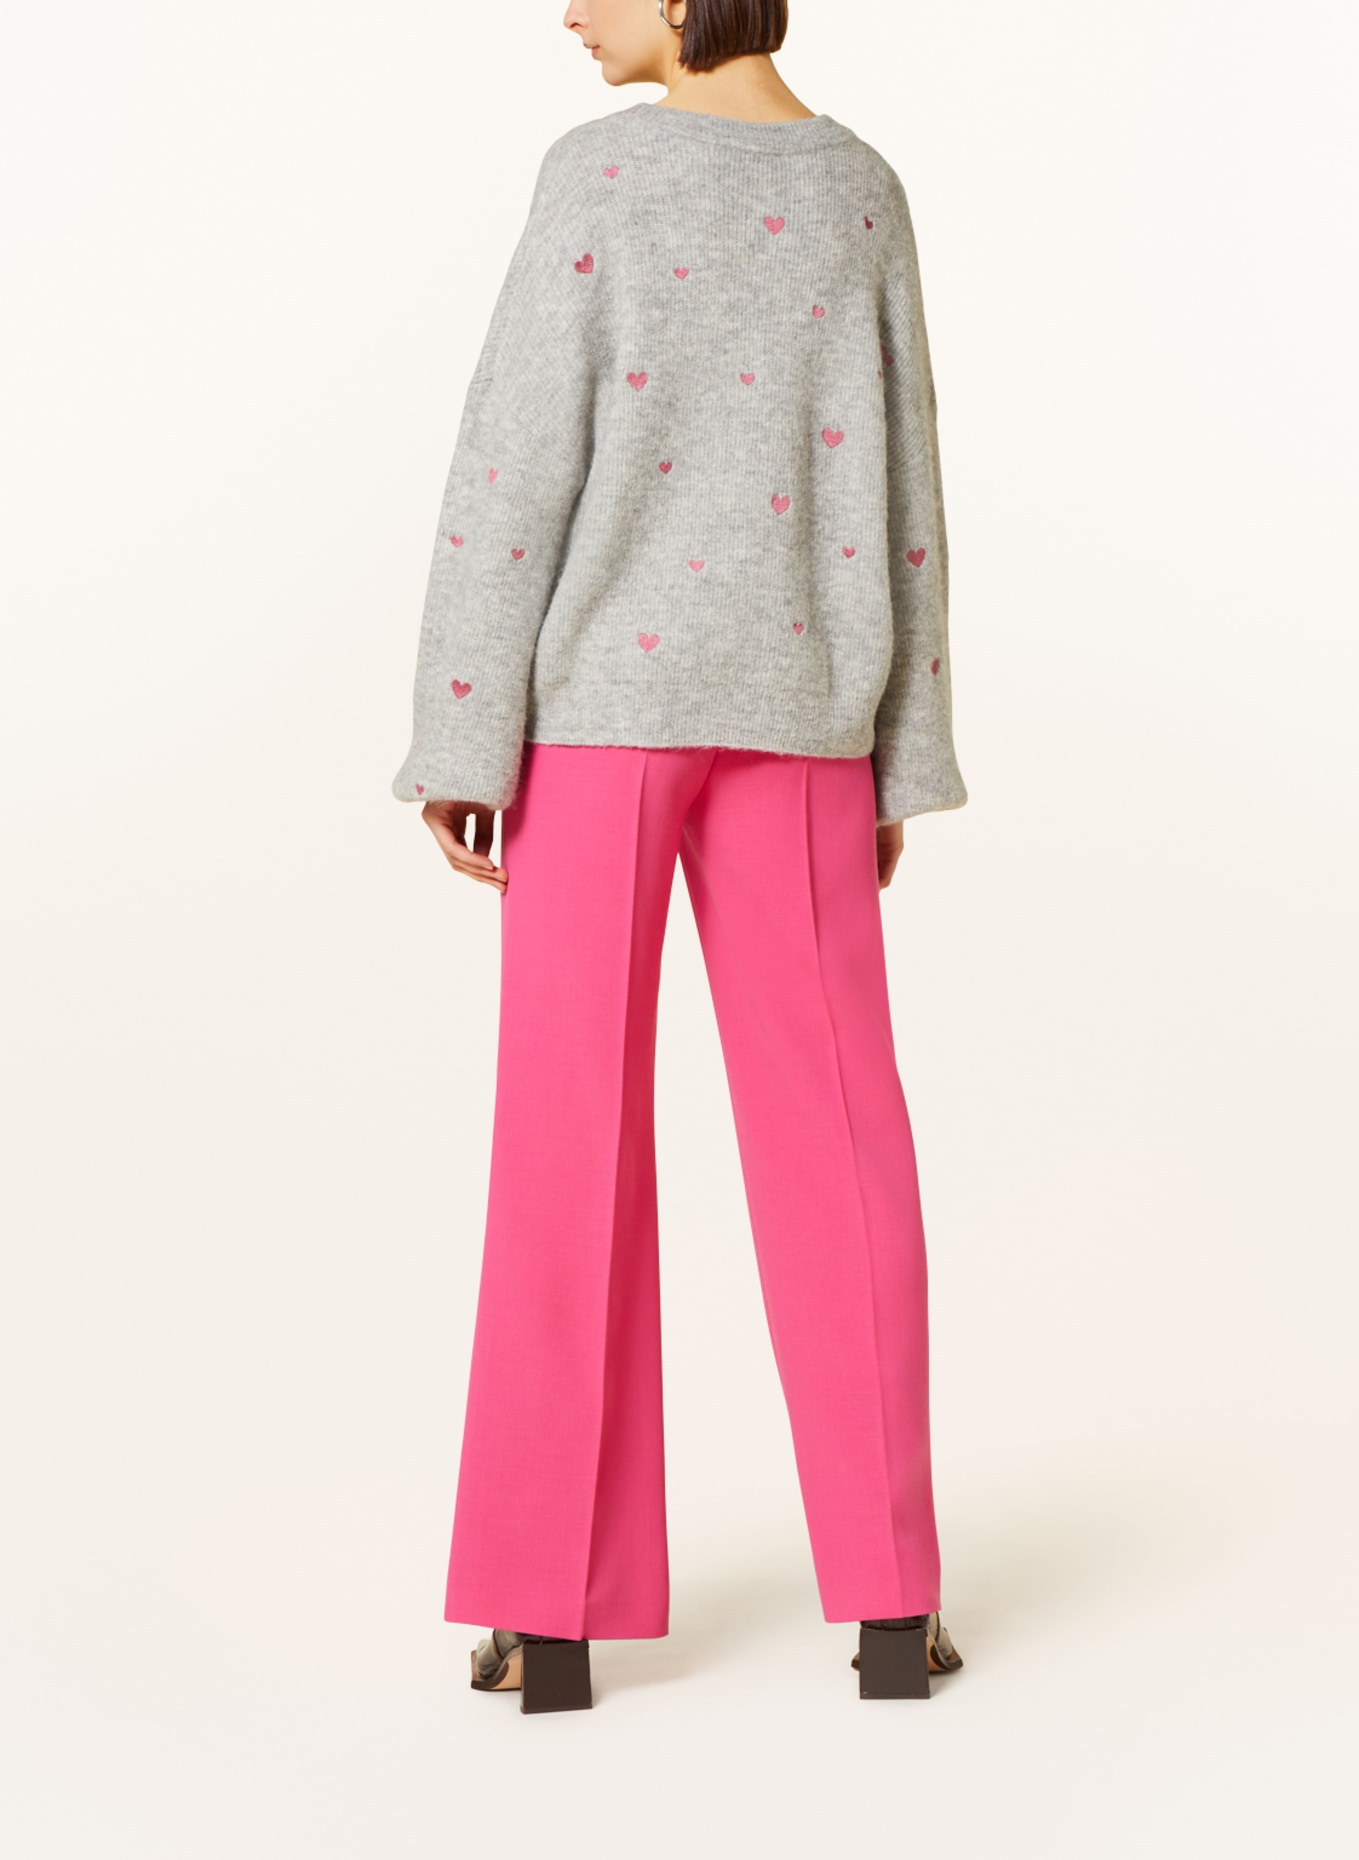 FABIENNE CHAPOT Sweater LIDIA with embroidery, Color: GRAY/ DUSKY PINK (Image 3)